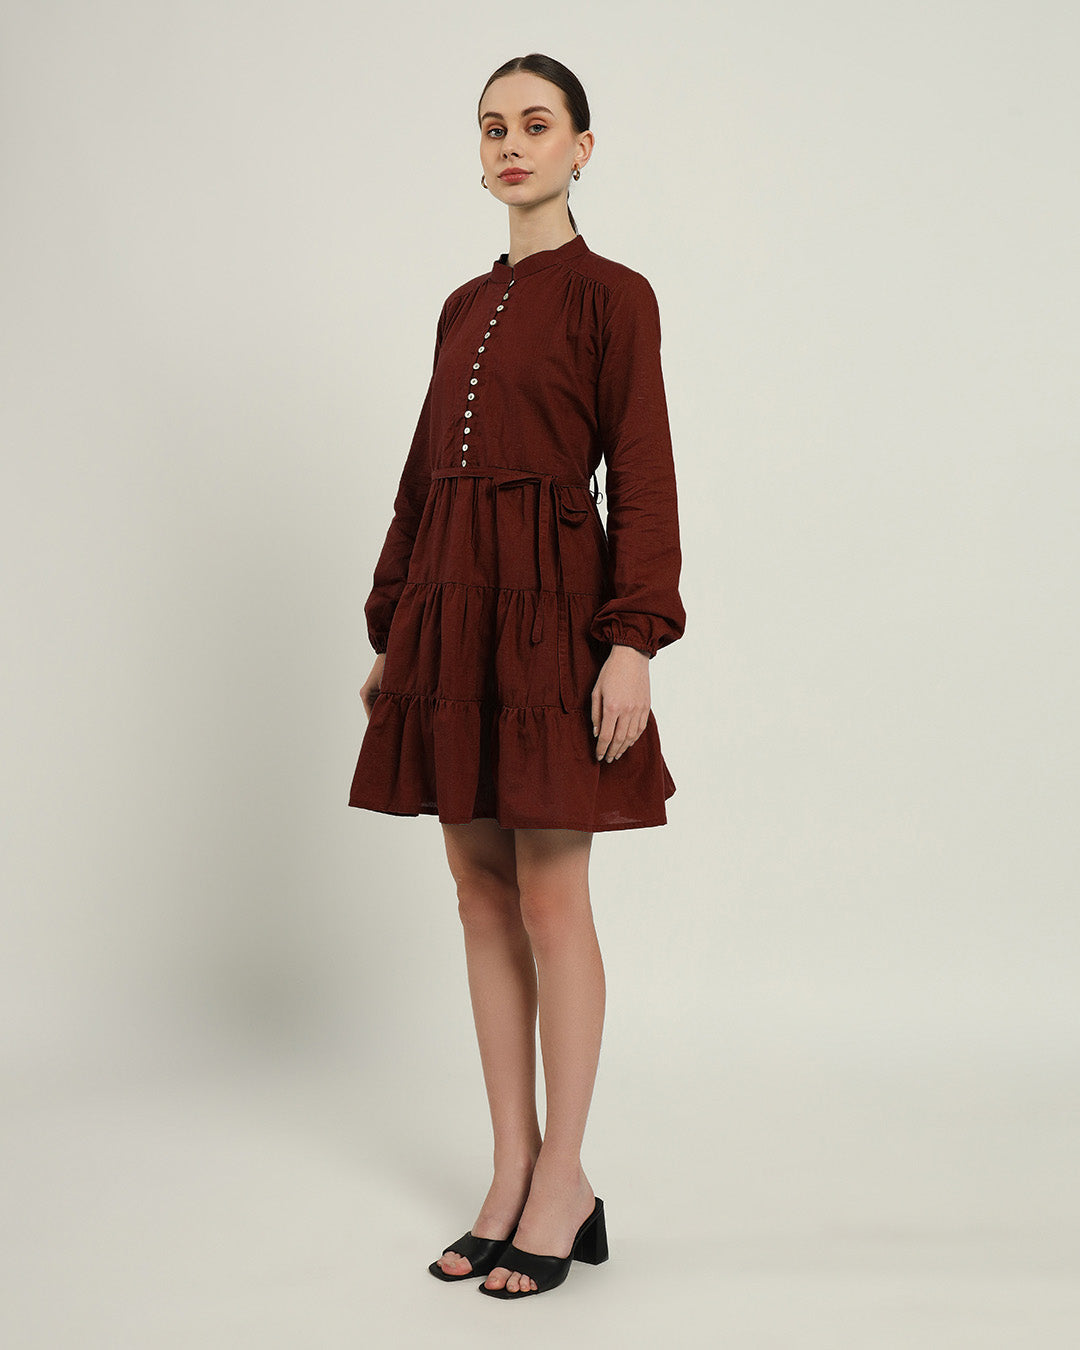 The Ely Rouge Cotton Dress